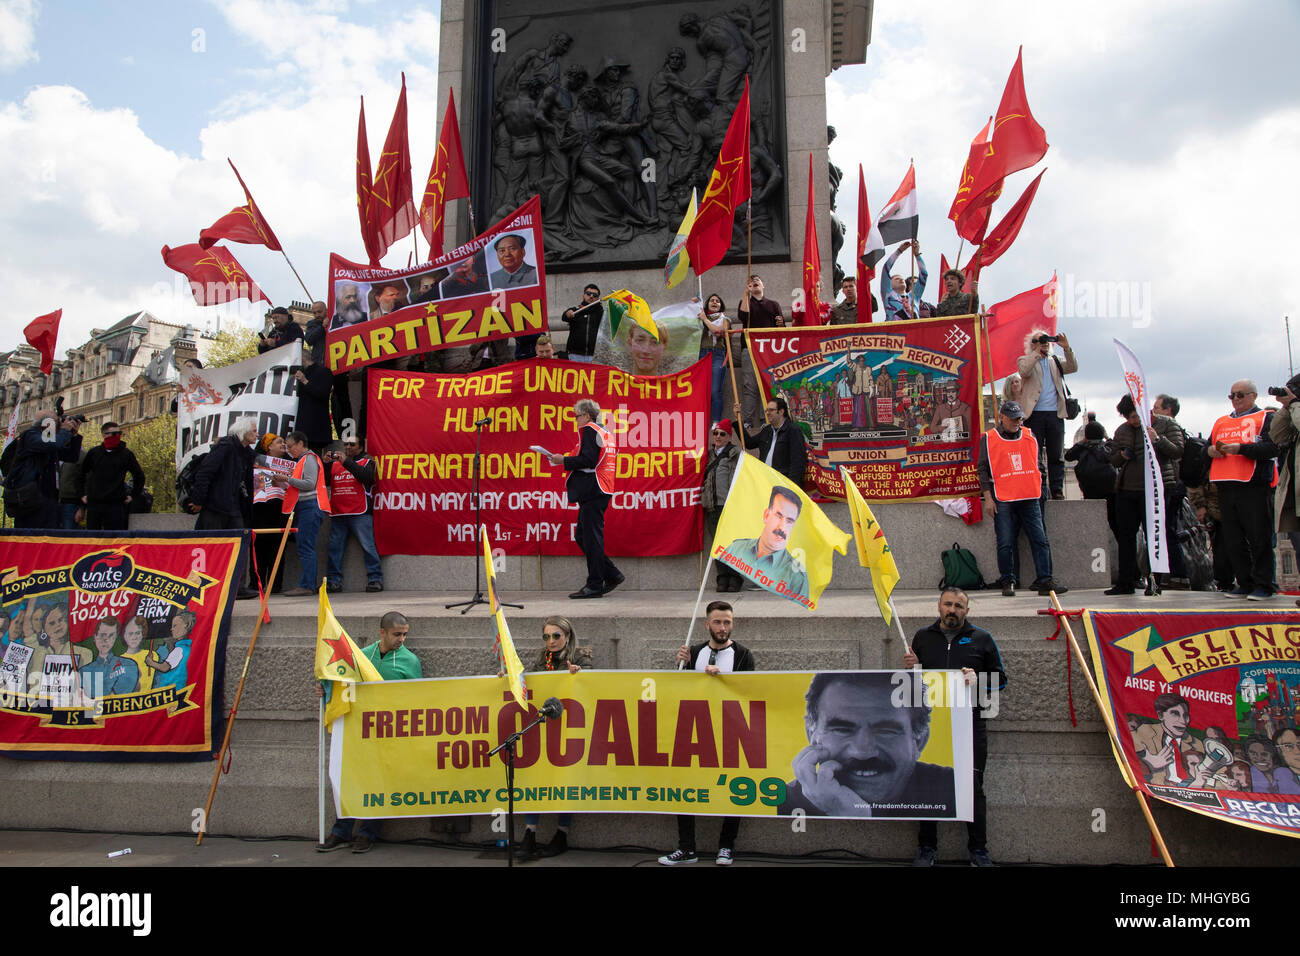 London, UK. 1st May, 2018. Communist Party of Great Britain red flags  during May Day celebrations in London, England, United Kingdom.  Demonstration by unions and other organisations of workers to mark the